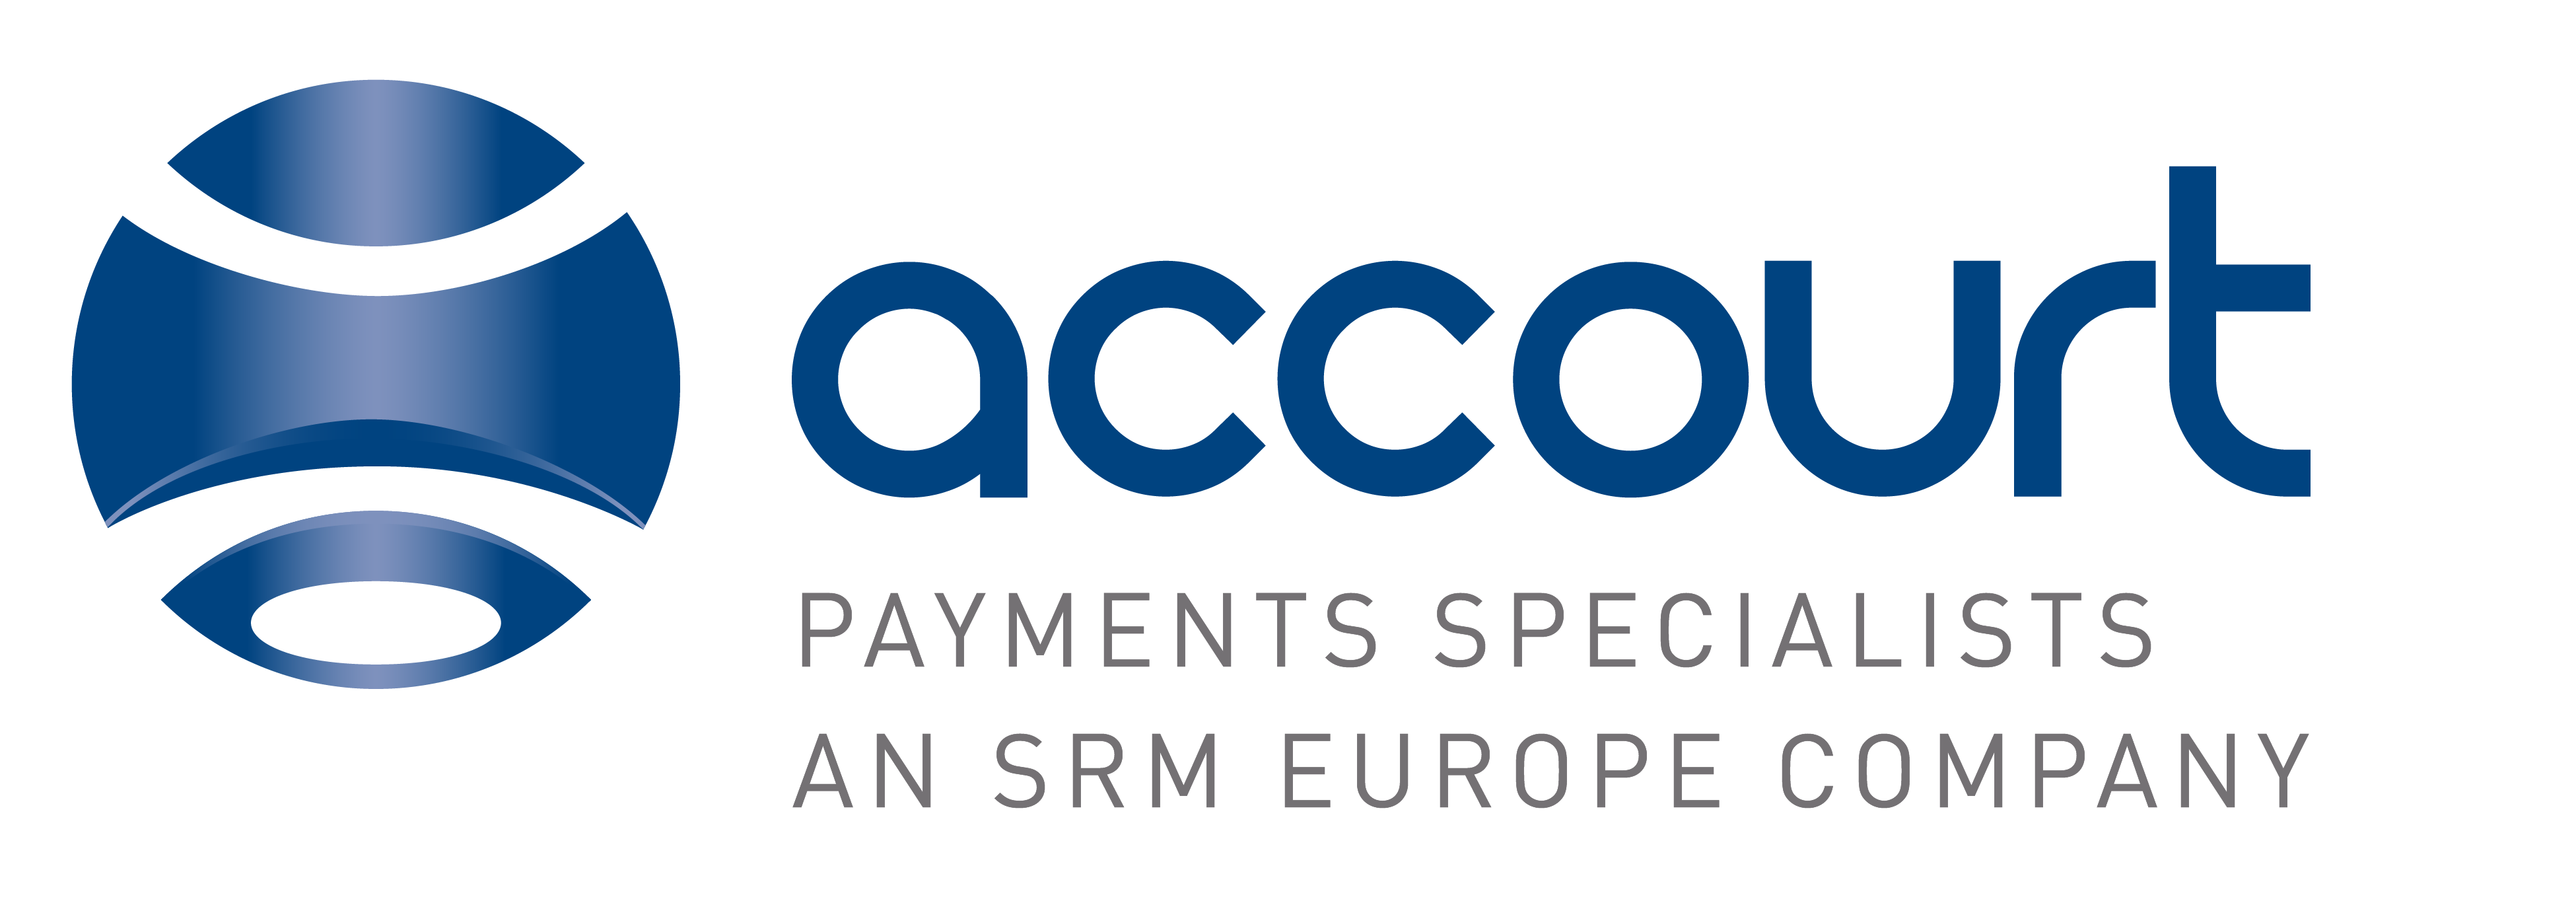 ACCOURT PAYMENTS SPECIALISTS